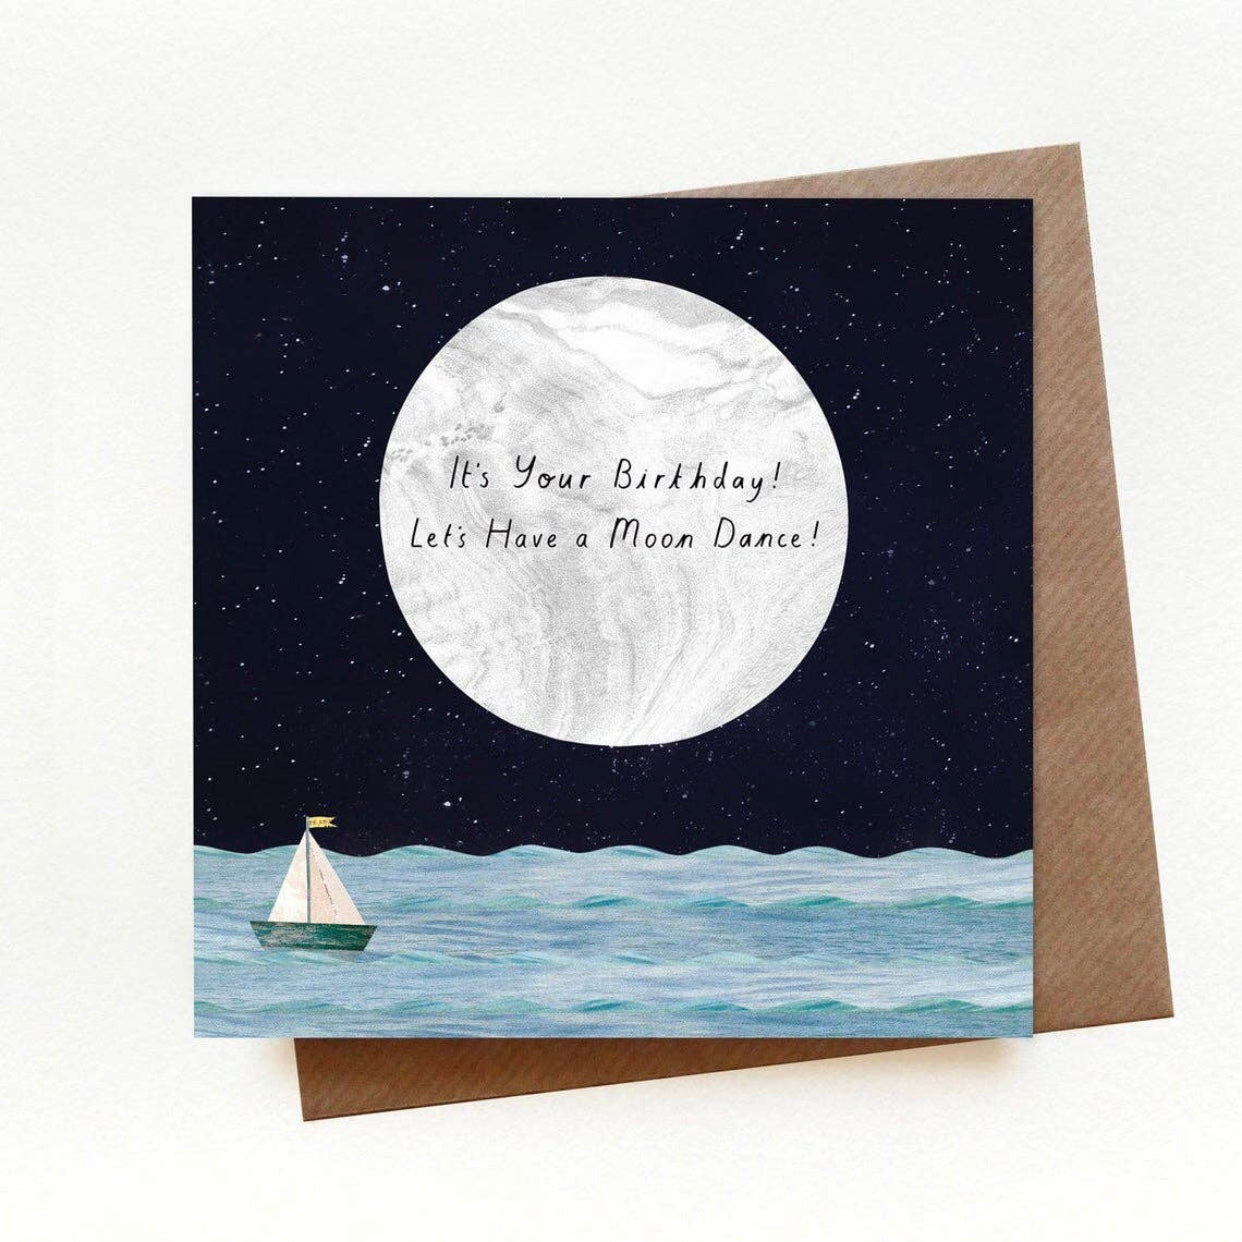 it's your birthday, let's have a moon dance greeting card